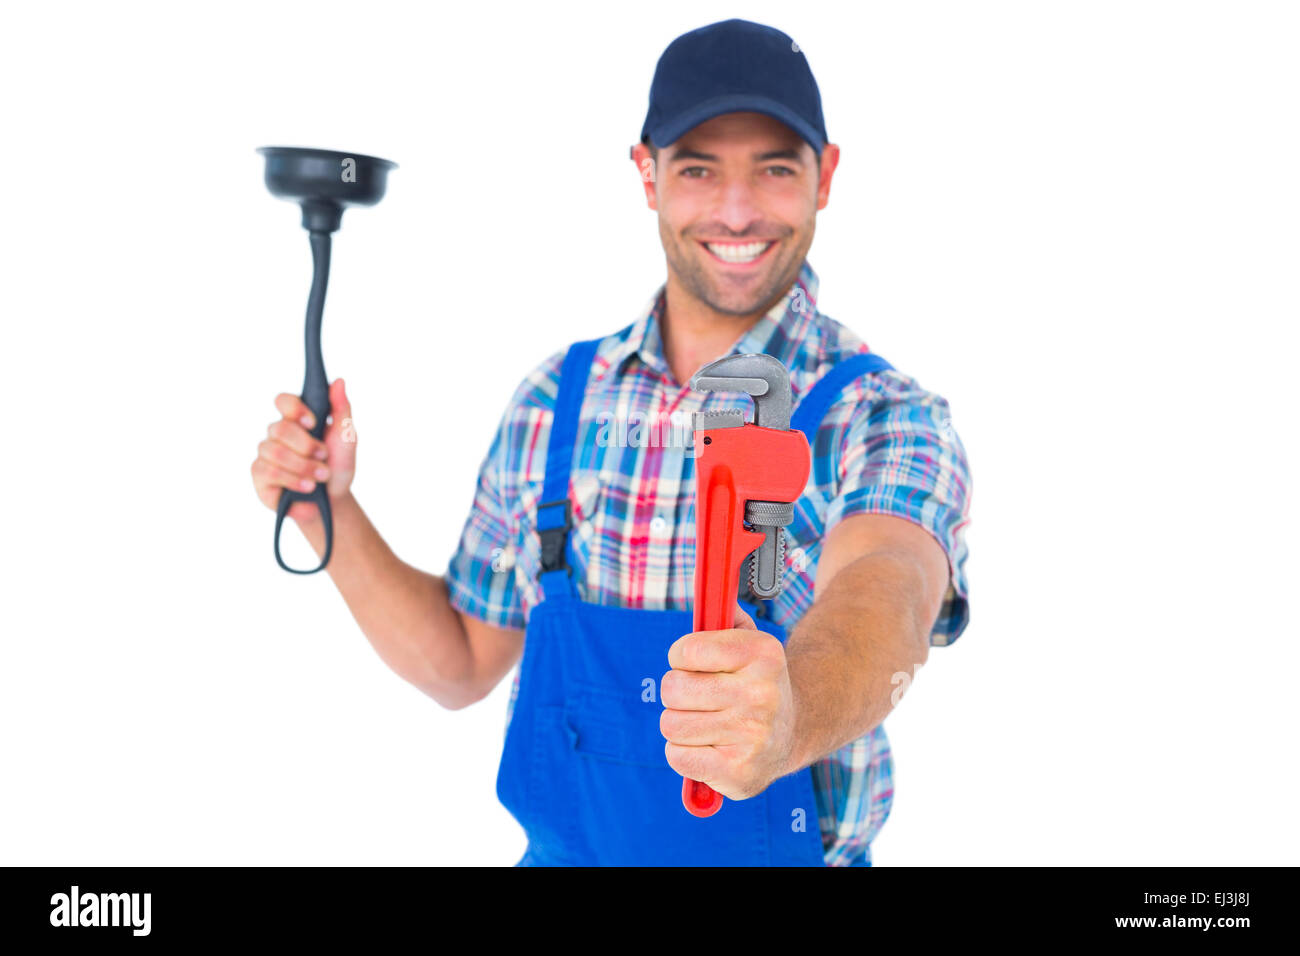 Handyman holding plunger and wrench on white background Stock Photo